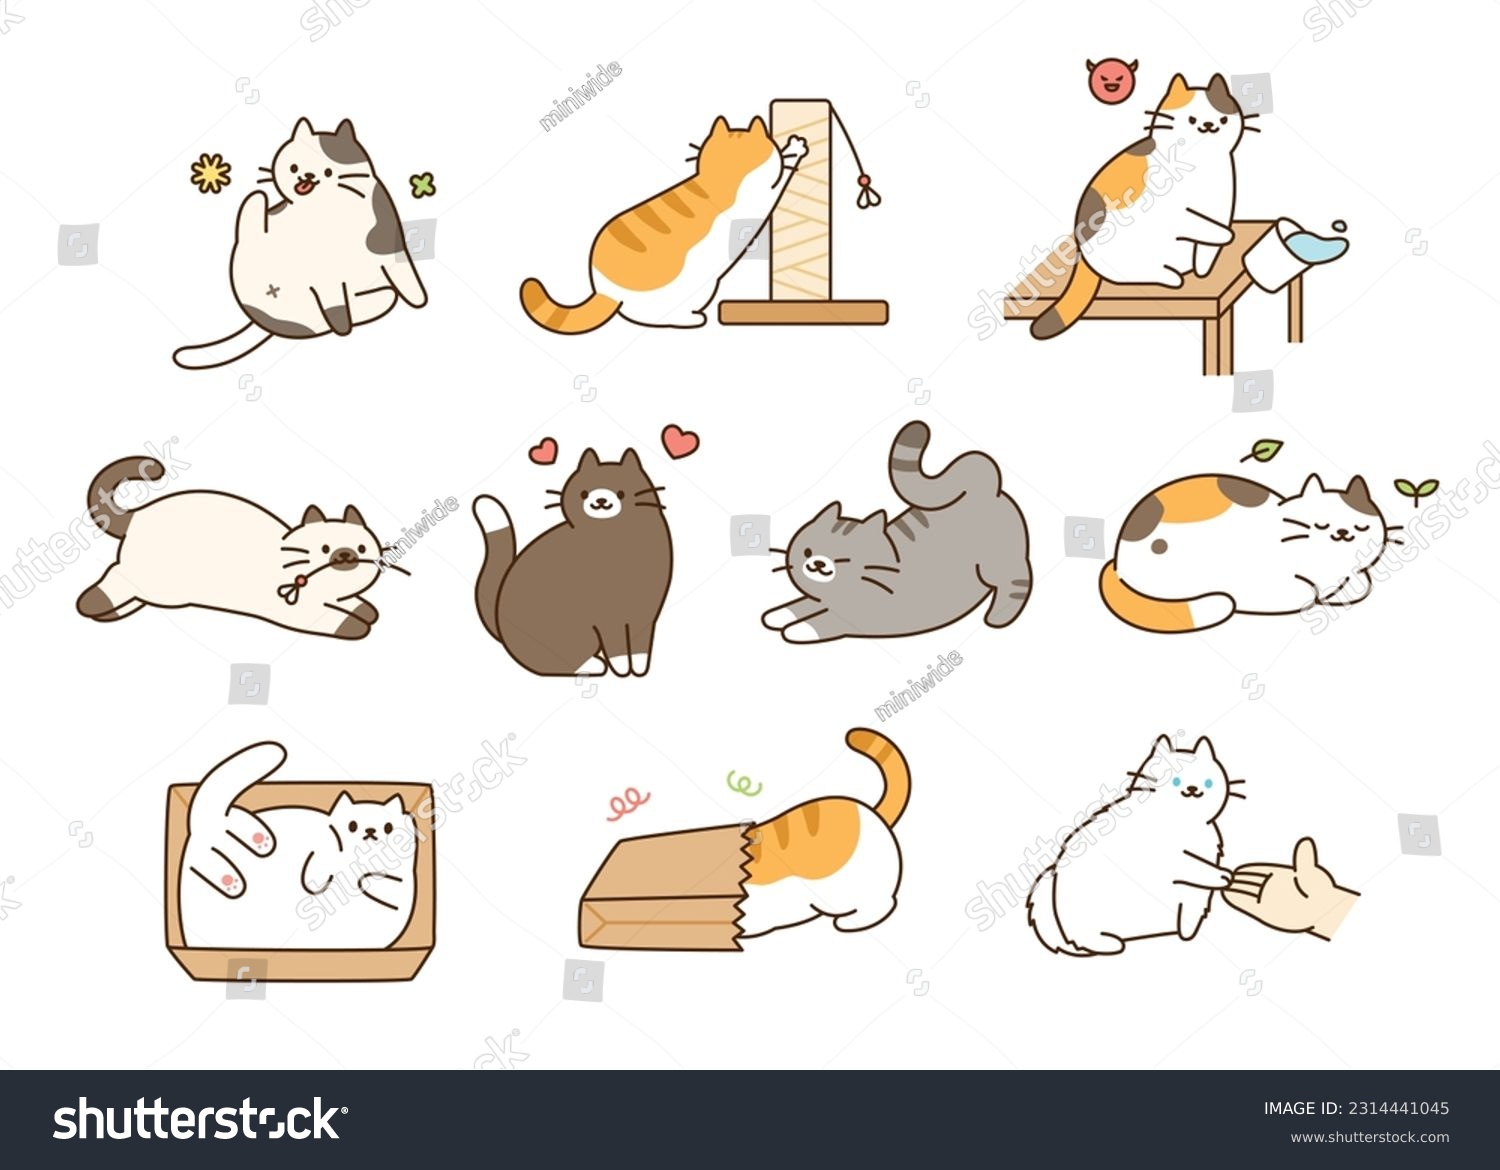 SVG of Fat cute cat lifestyle. They are joking around, having accidents, and having fun. svg